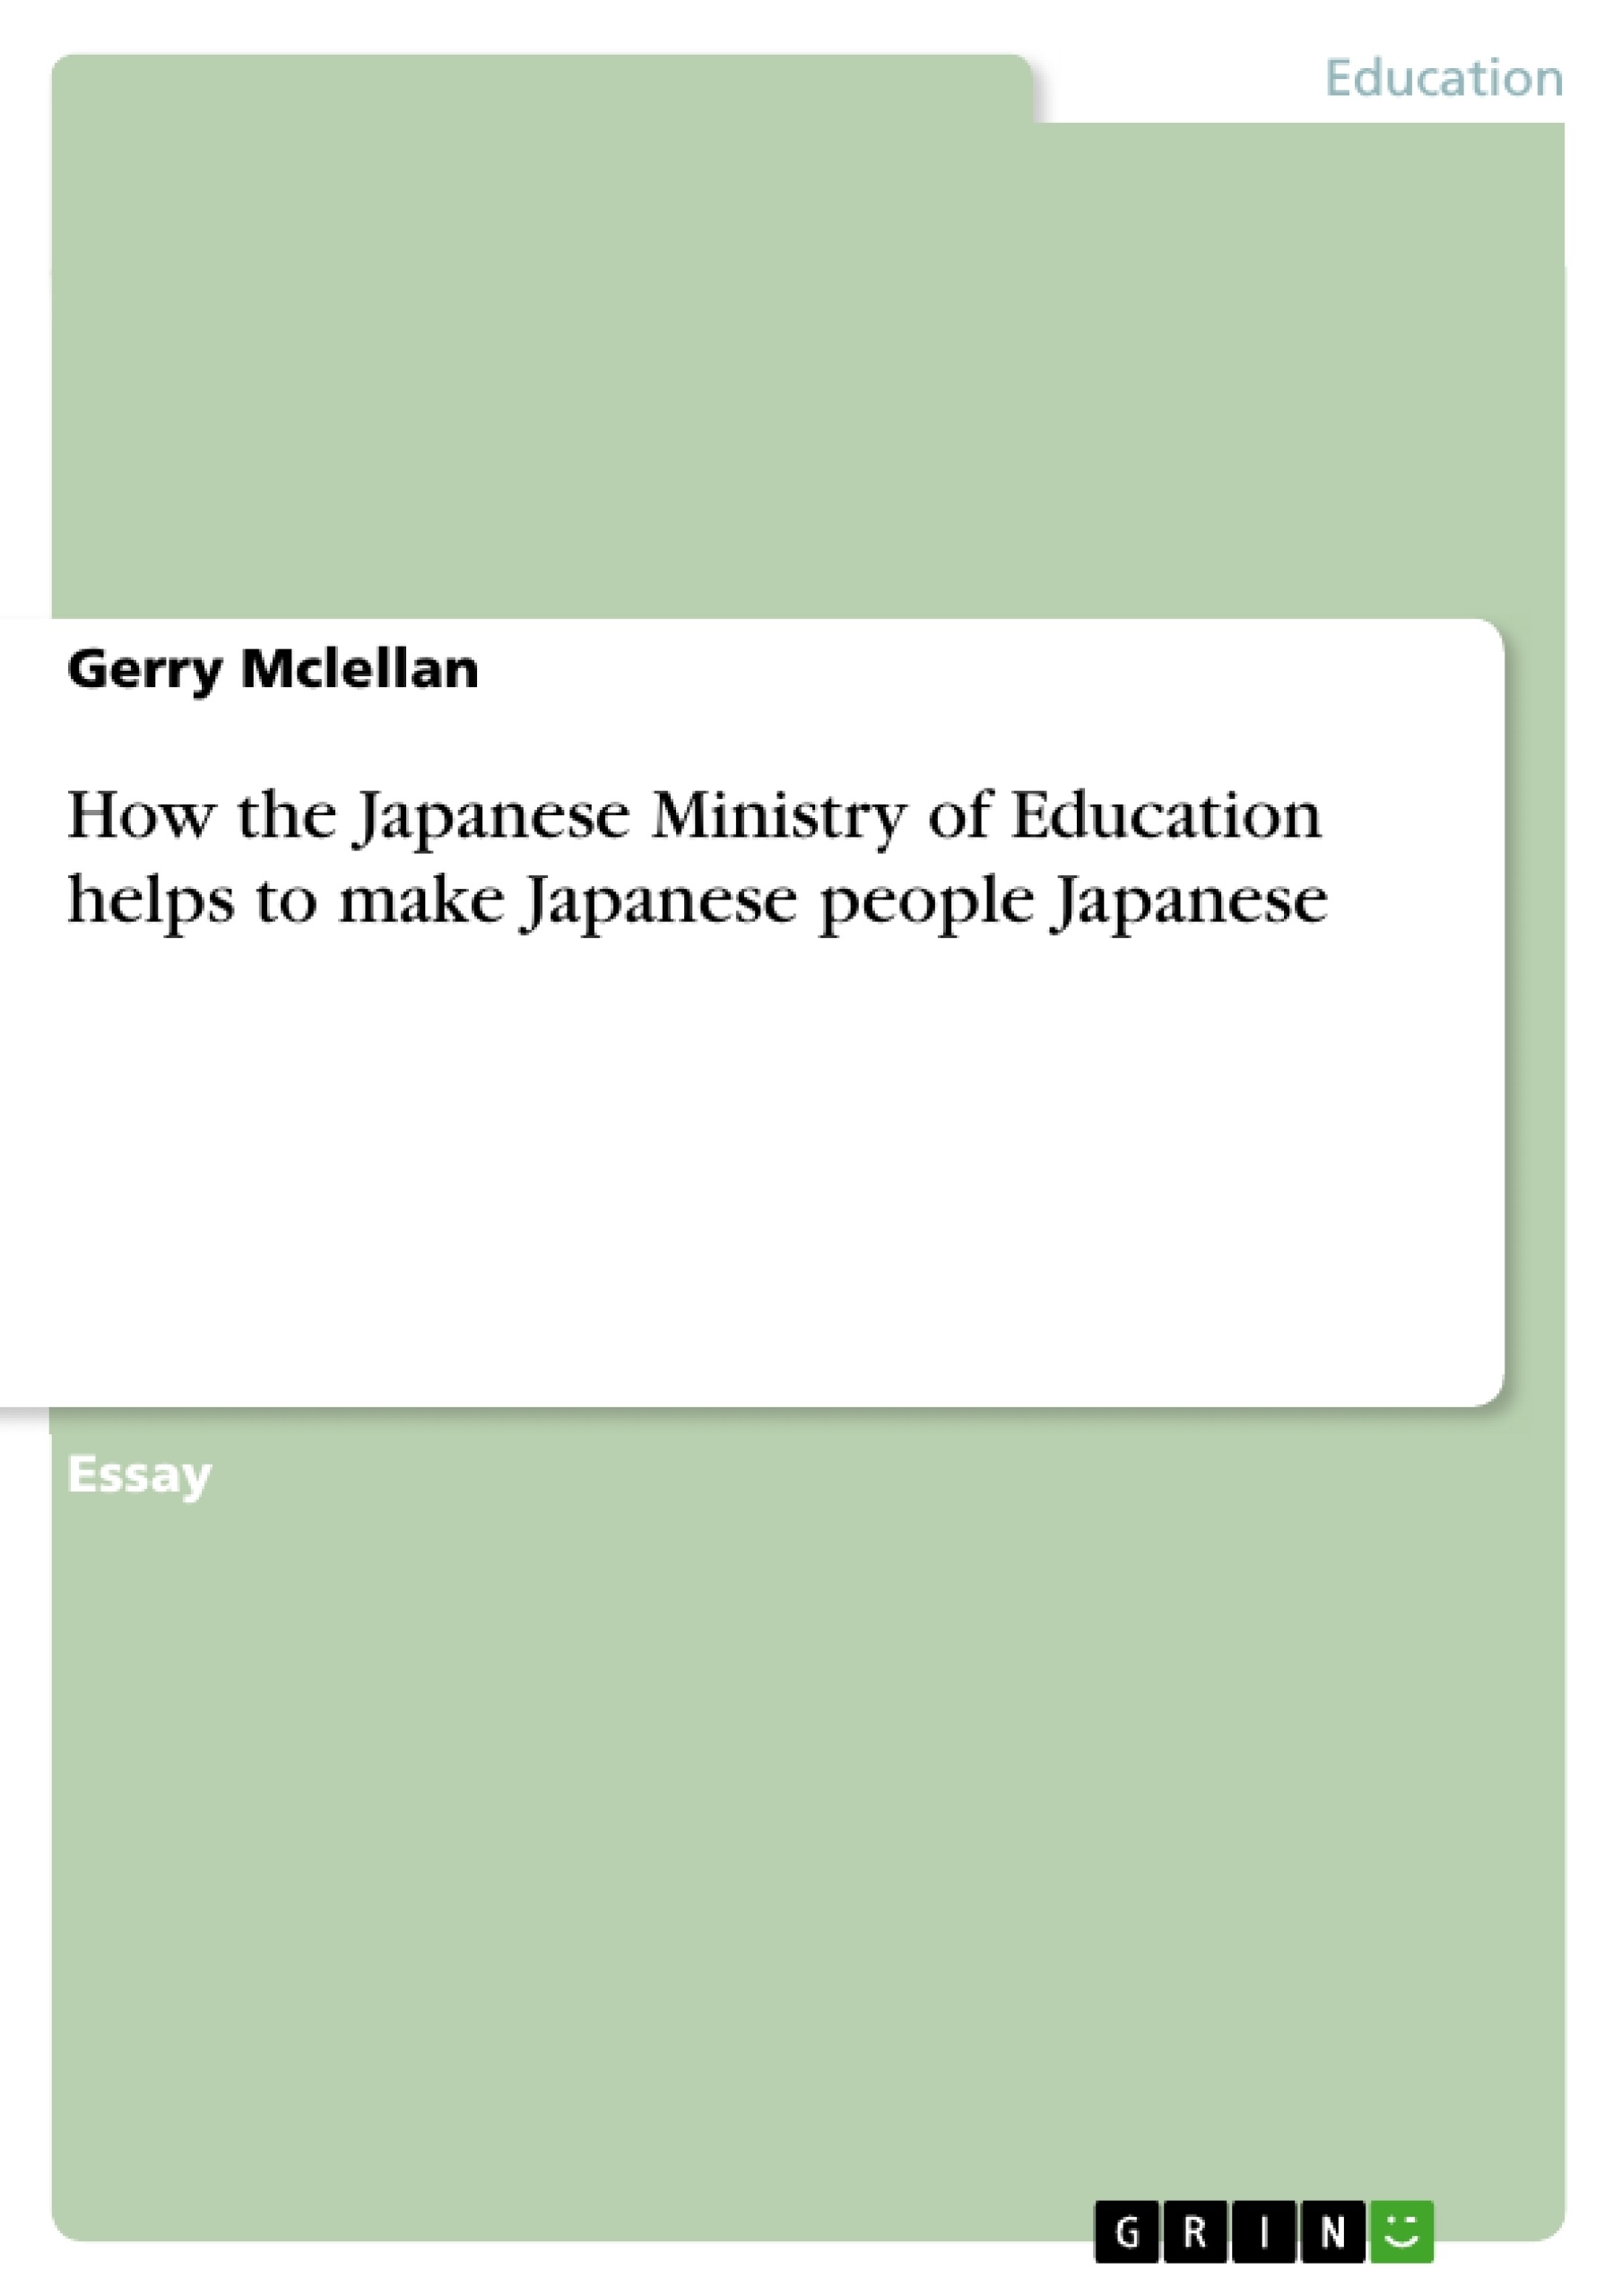 Title: How the Japanese Ministry of Education helps to make Japanese people Japanese